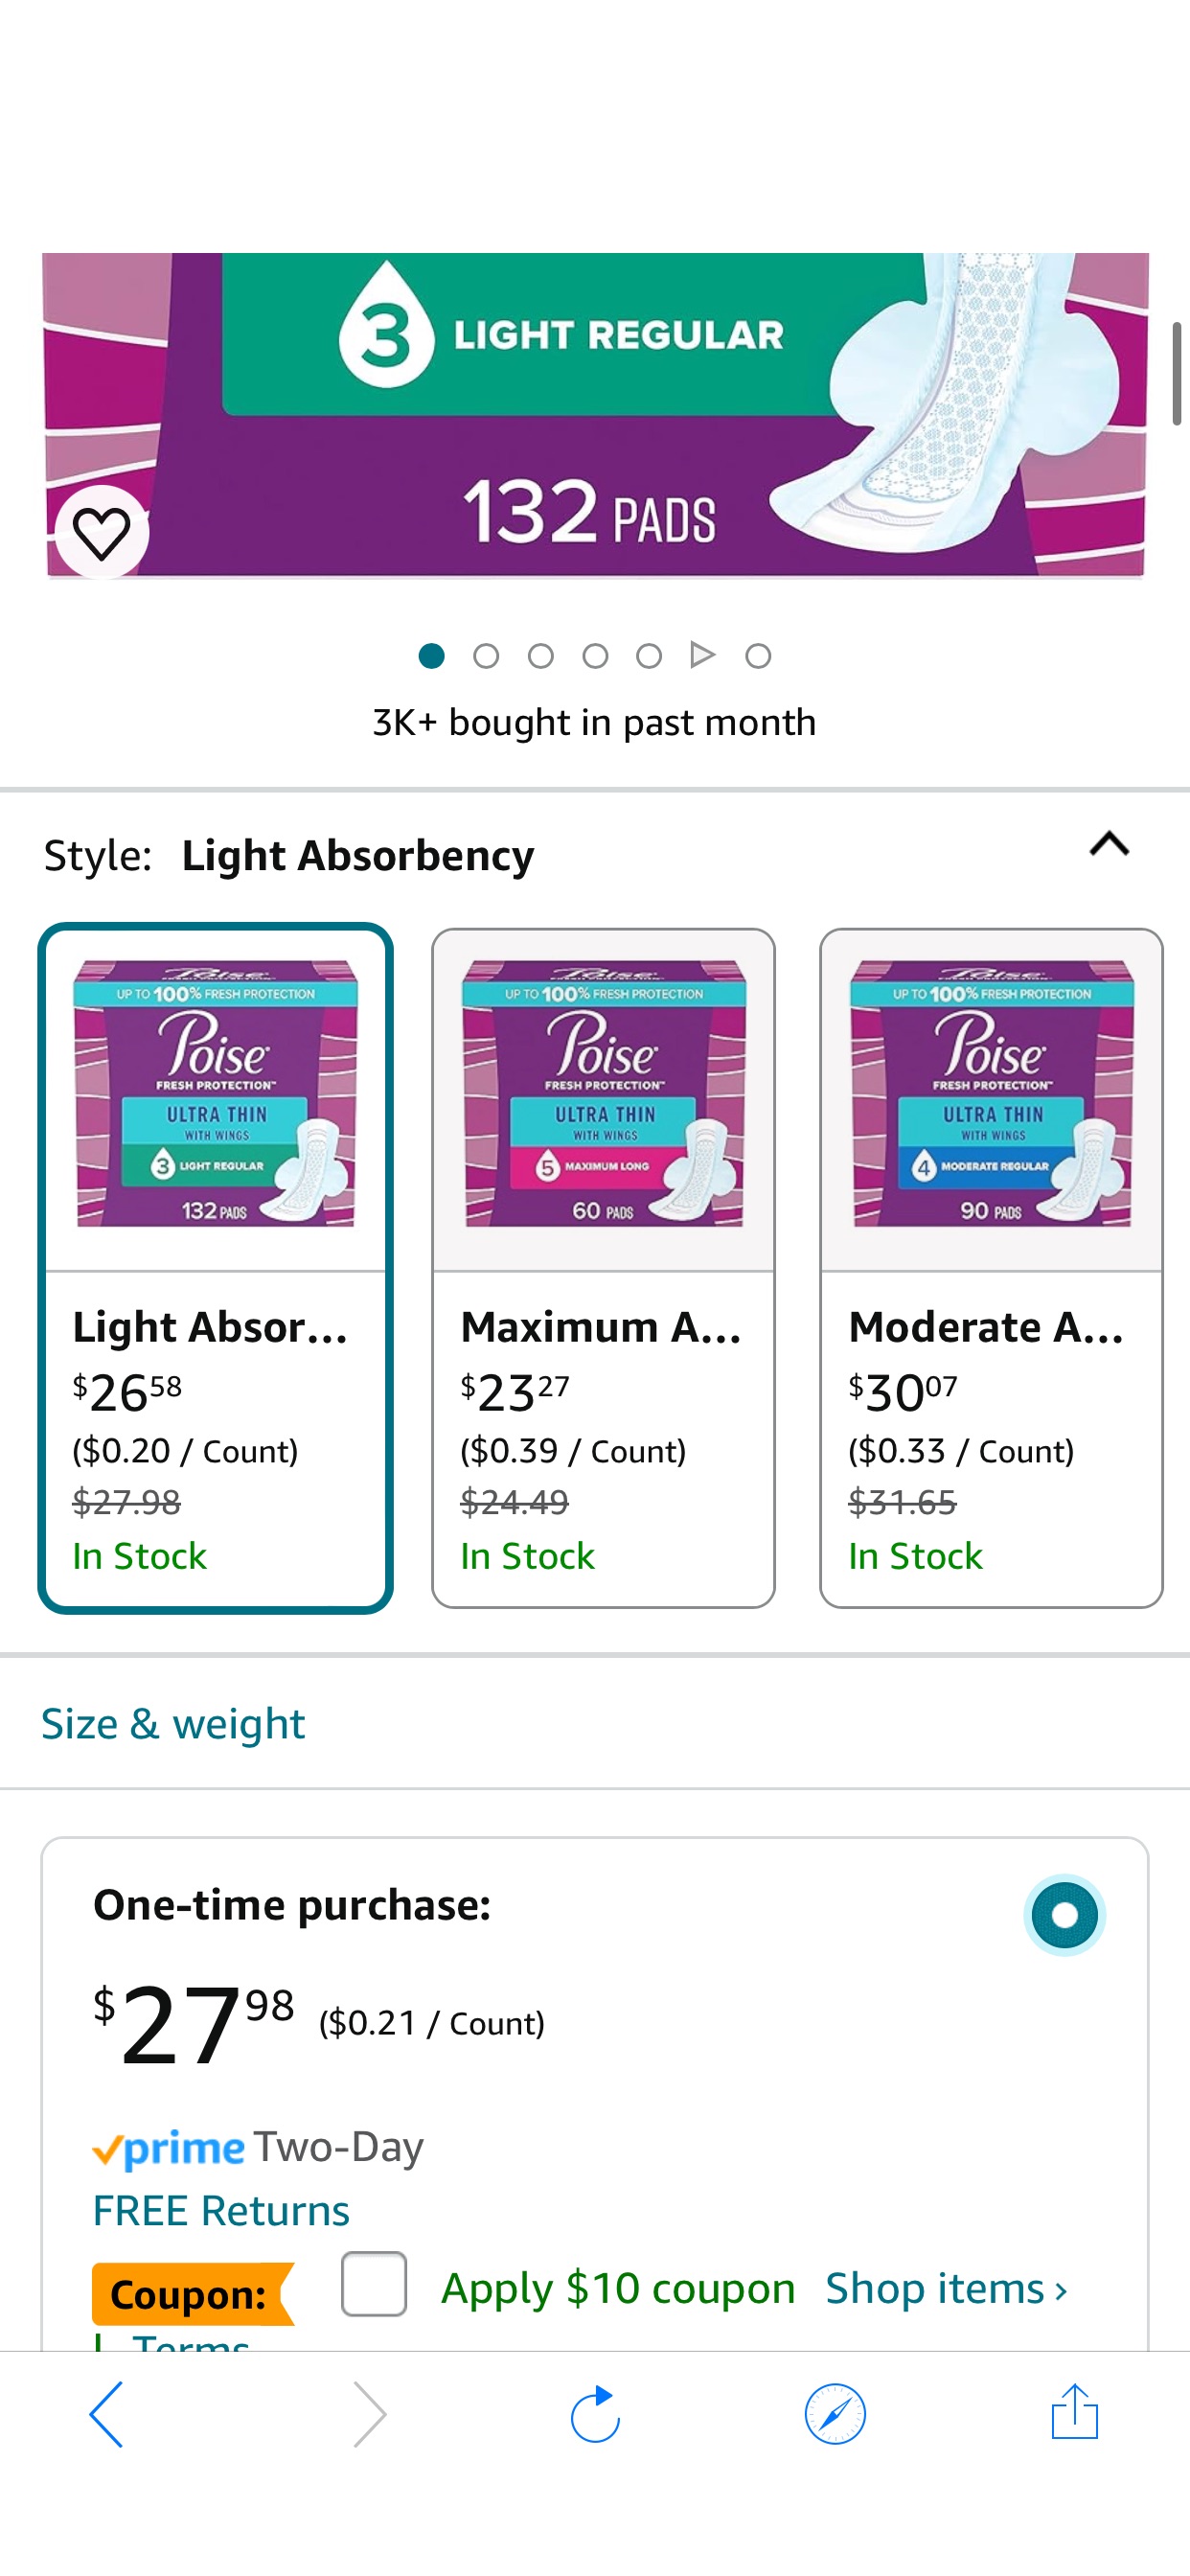 Amazon.com: Poise Ultra Thin Incontinence Pads with Wings & Postpartum Incontinence Pads, 3 Drop Light Absorbency, Regular Length, 132 Count (3 Packs of 44), Packaging May Vary : Health & Household 超薄